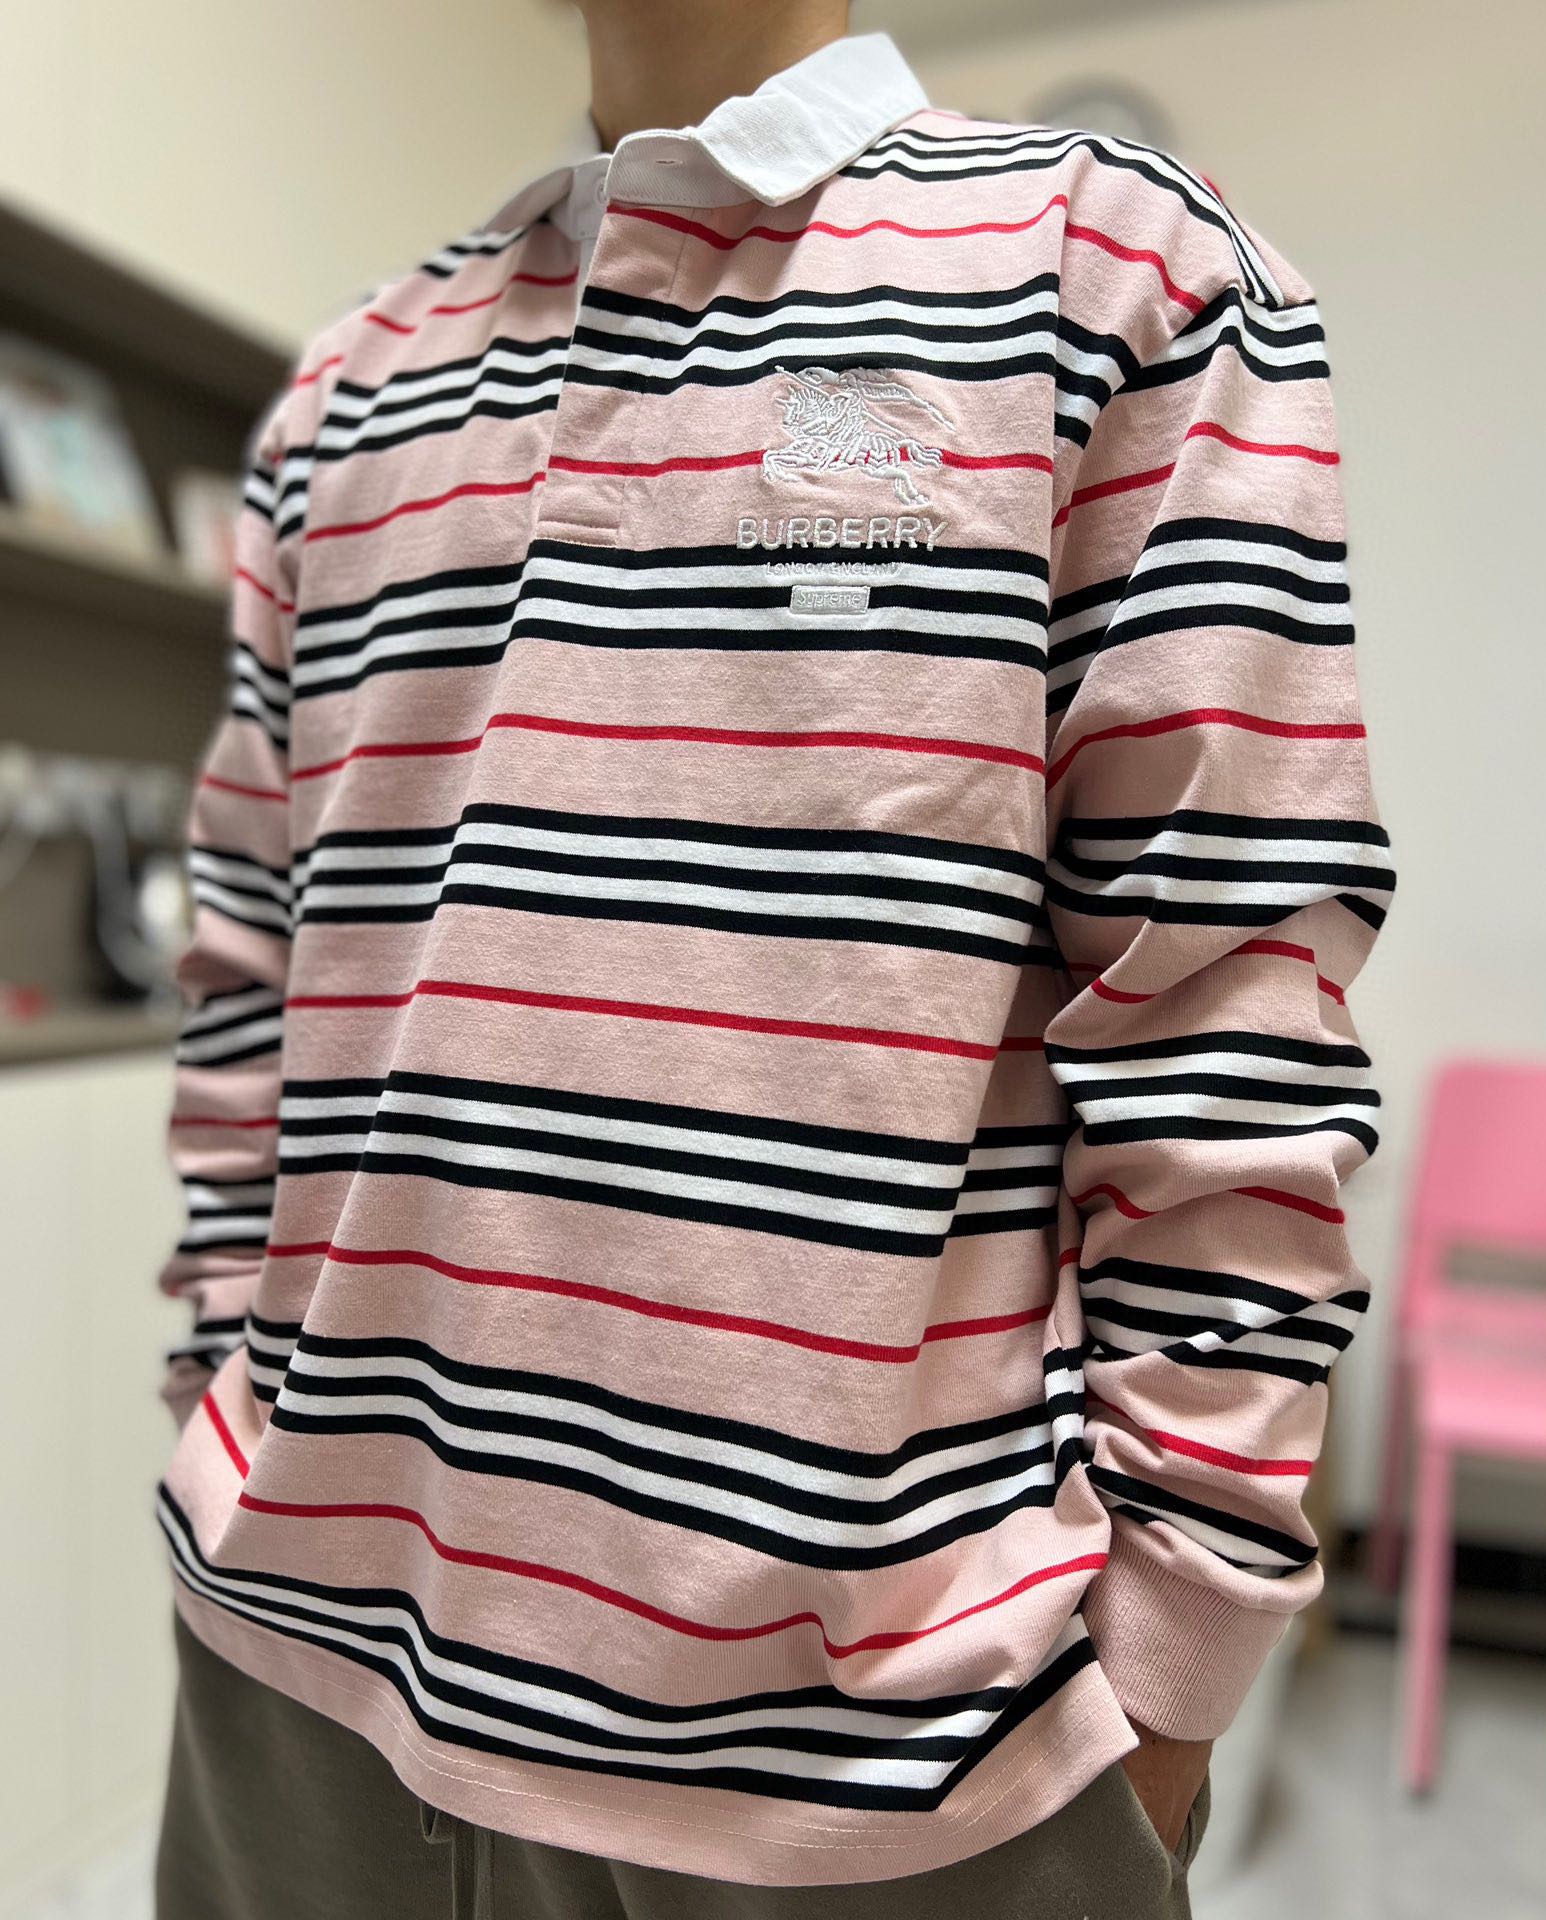 Supreme/Burberry Rugby 